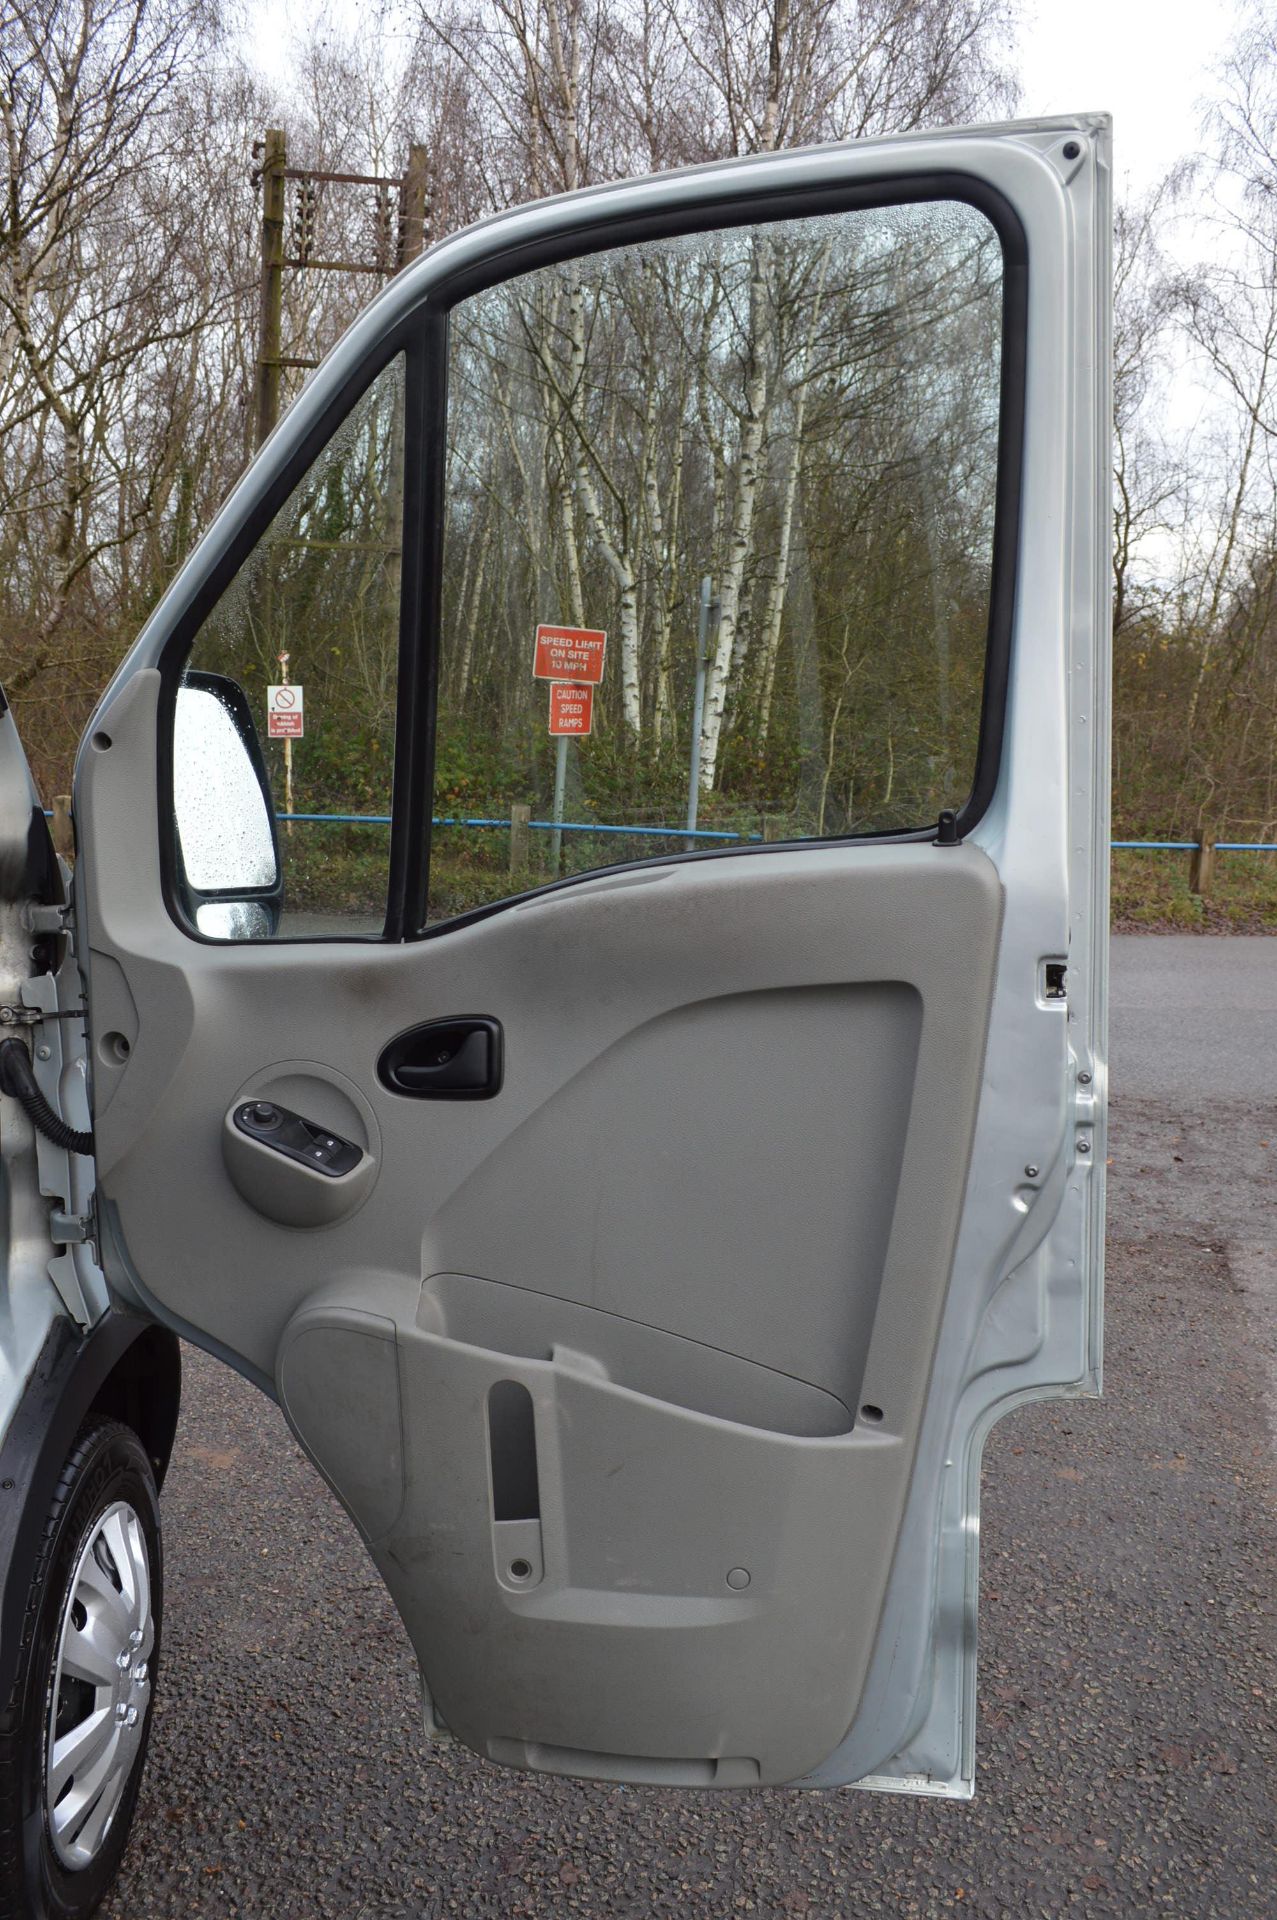 SUPER RARE 2010 RENAULT MASTER SL28 DCI 100 AUTO 2.5 DIESEL GREY DISABLED MINIBUS WITH RICON LIFT - Image 24 of 43